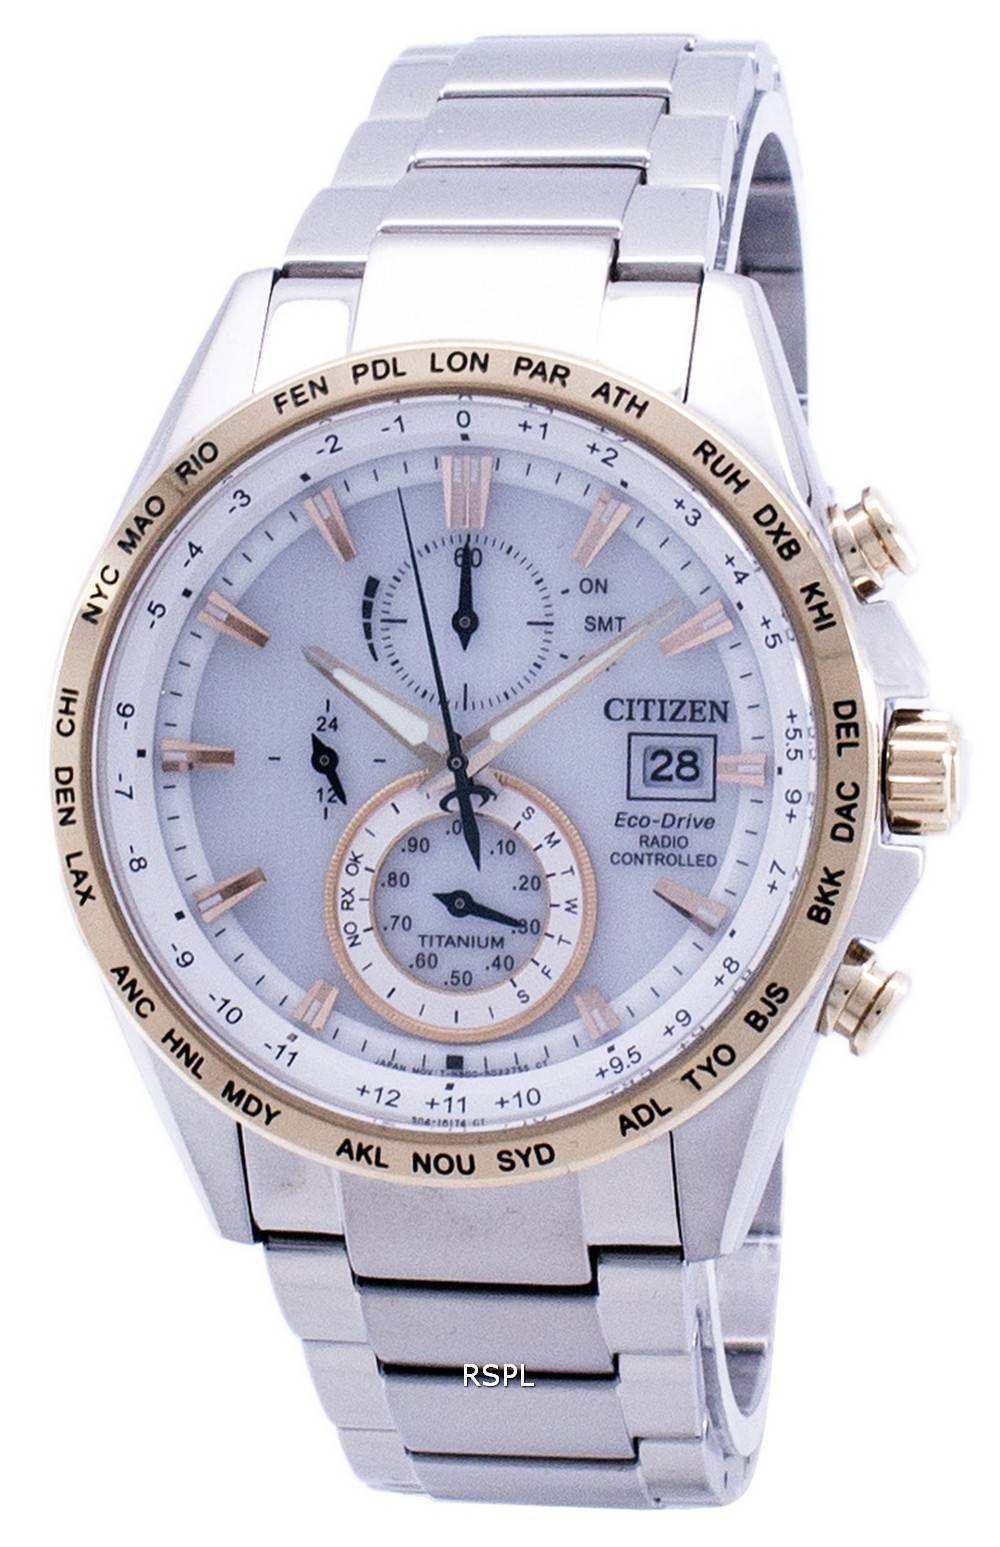 Citizen Eco-Drive Chronograph Power Reserve Radio Controlled AT8156-87A Men's Watch